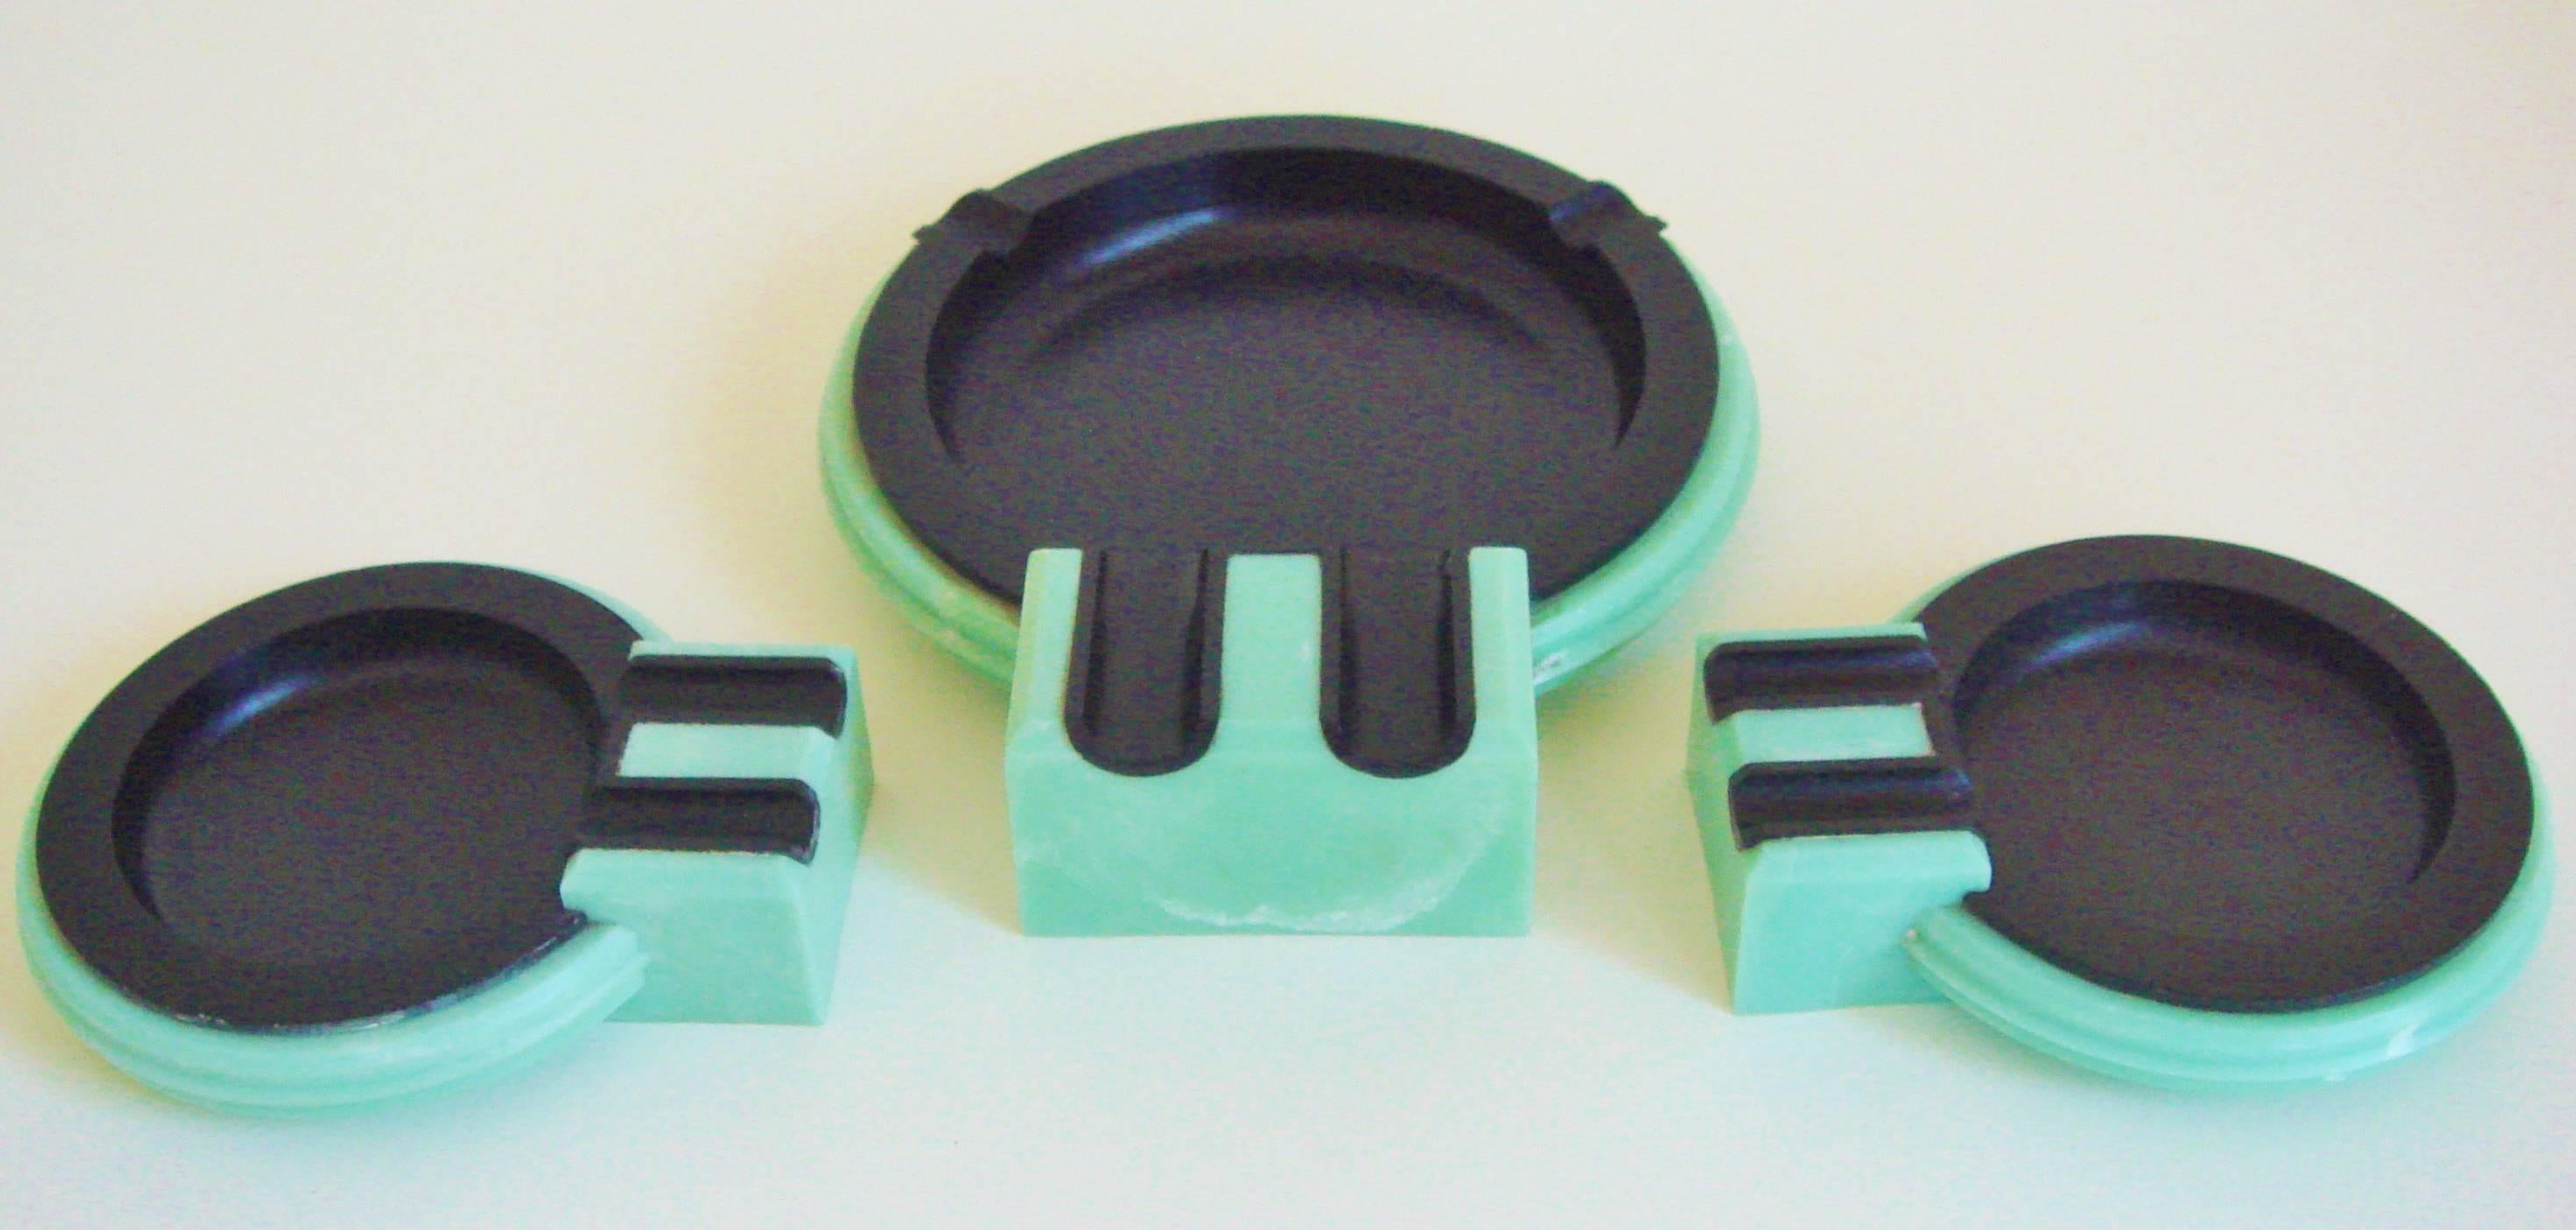 This set of British Art Deco black Bakelite and aqua phenolic ashtrays represent the third version of an iconic design that was originally produced for the launch of the Cunard Liner, RMS Queen Mary. The first or 